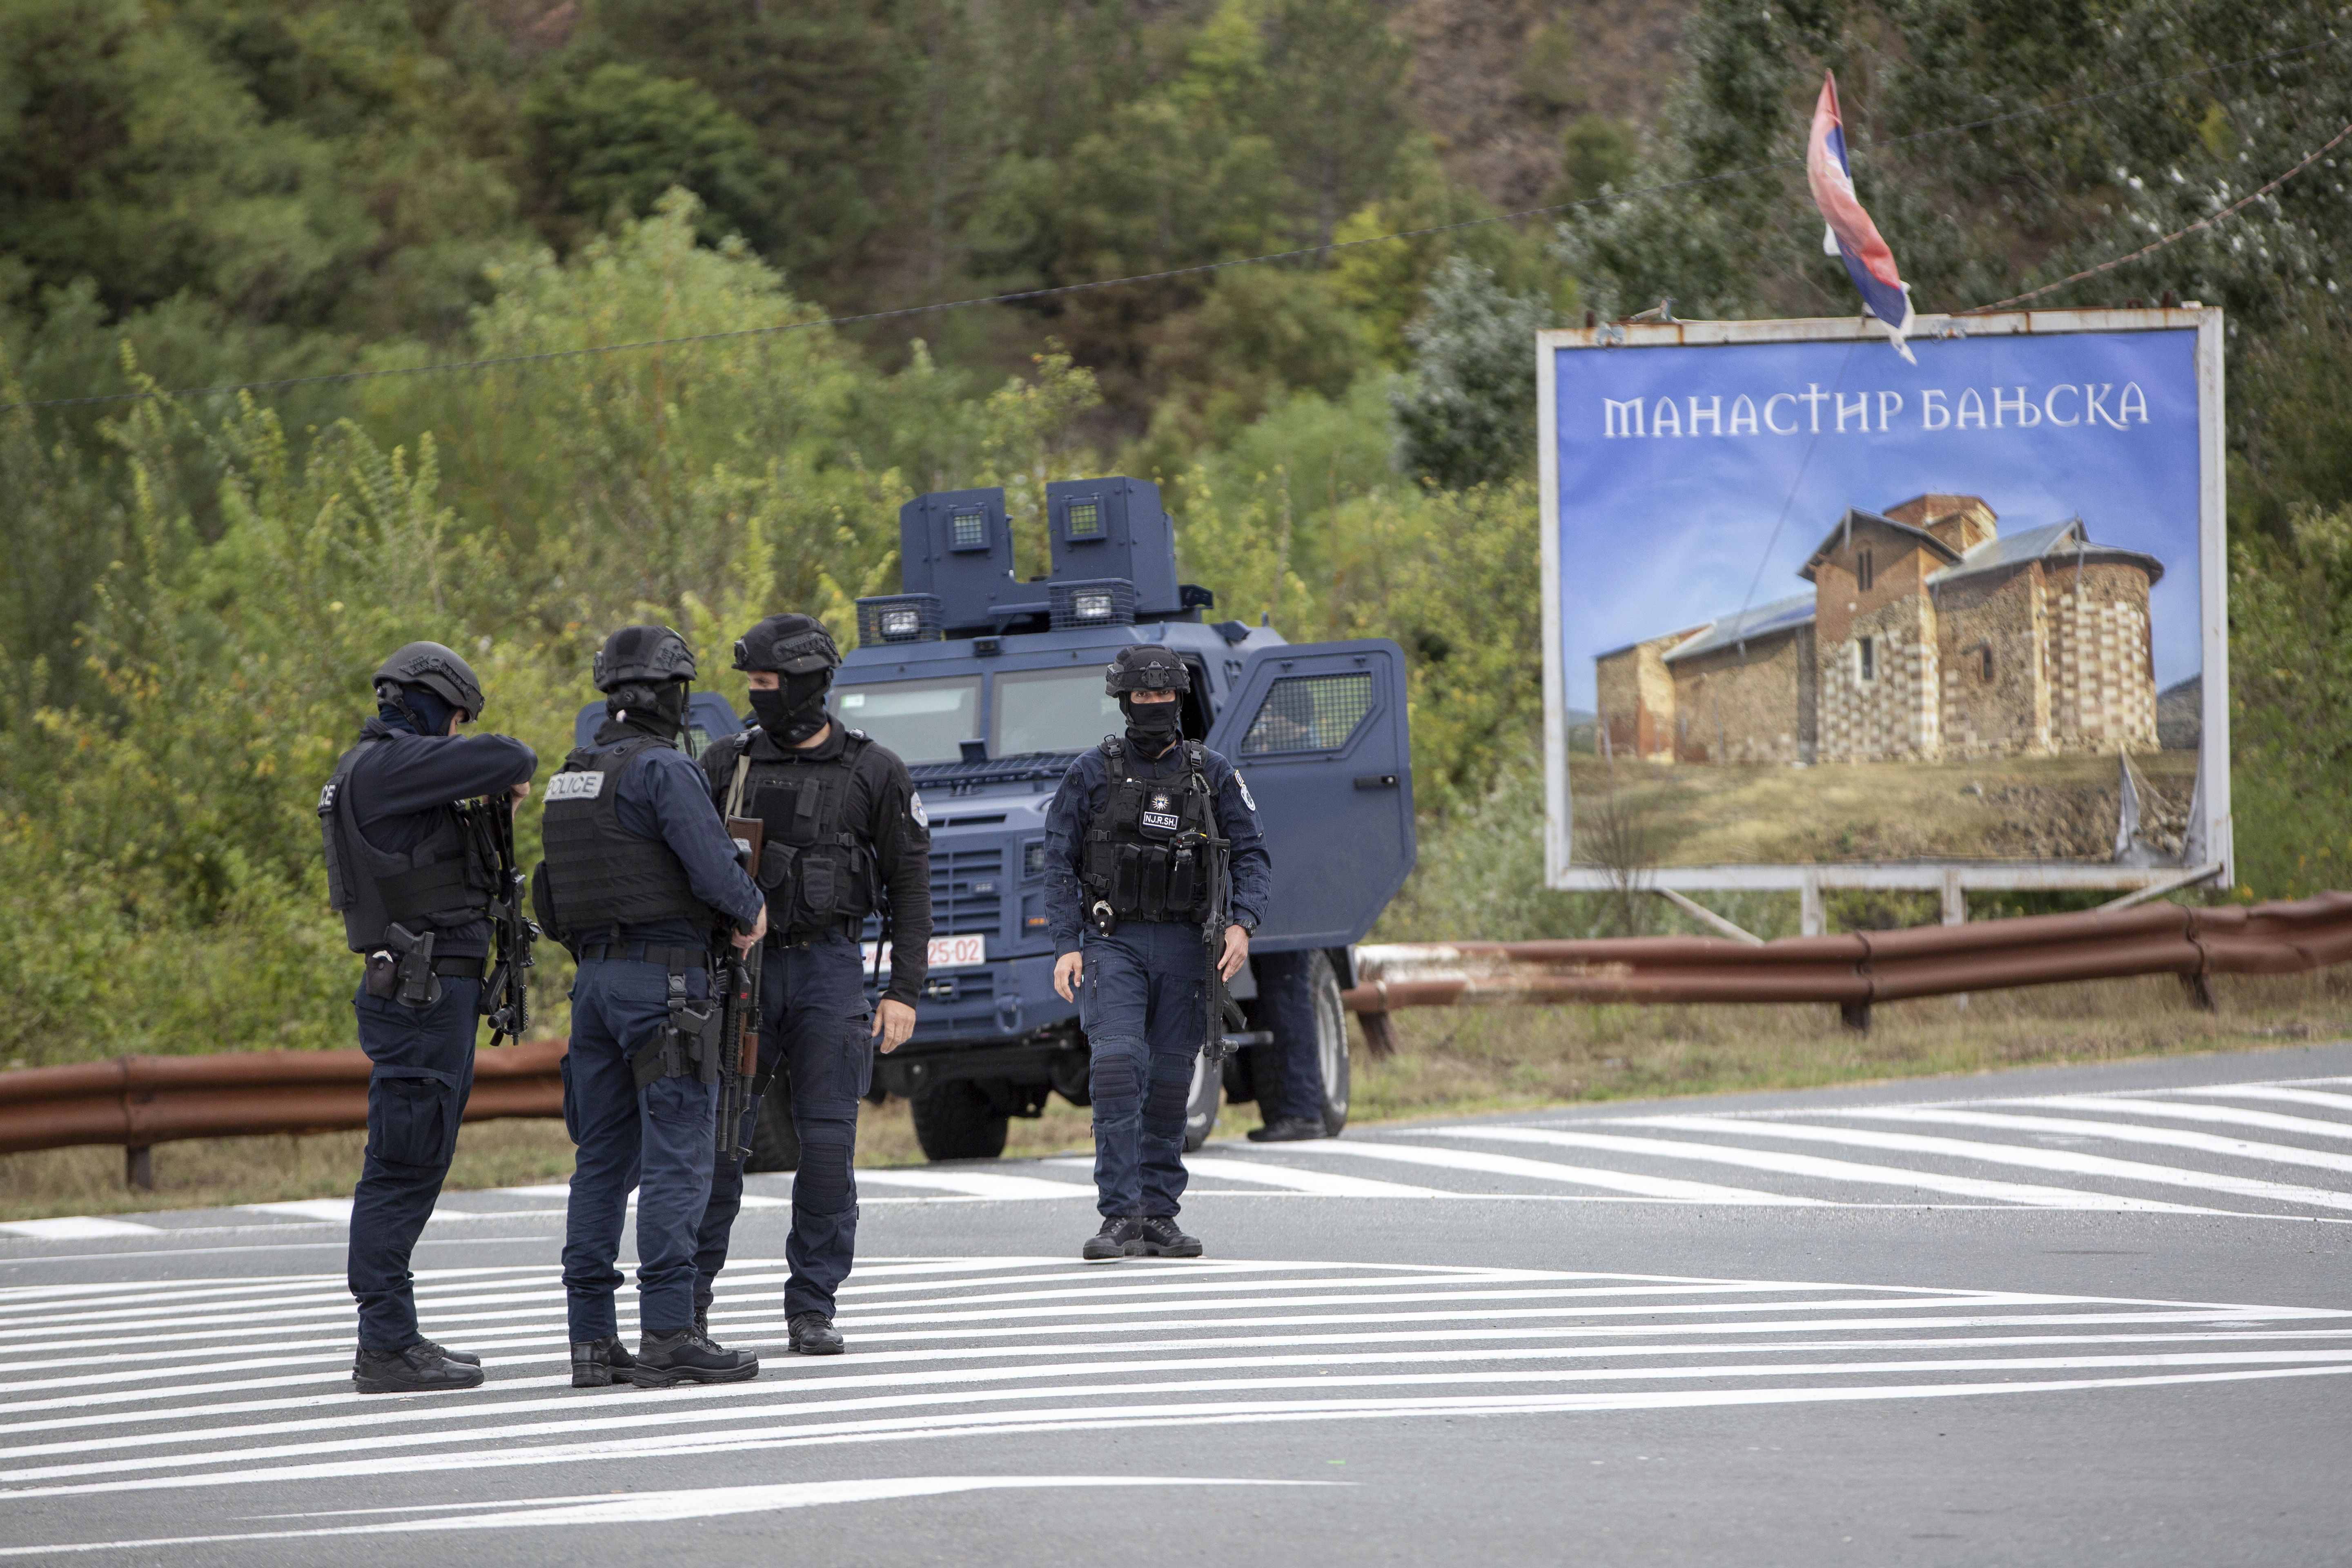 Police on high alert over possibility of attack by escaped